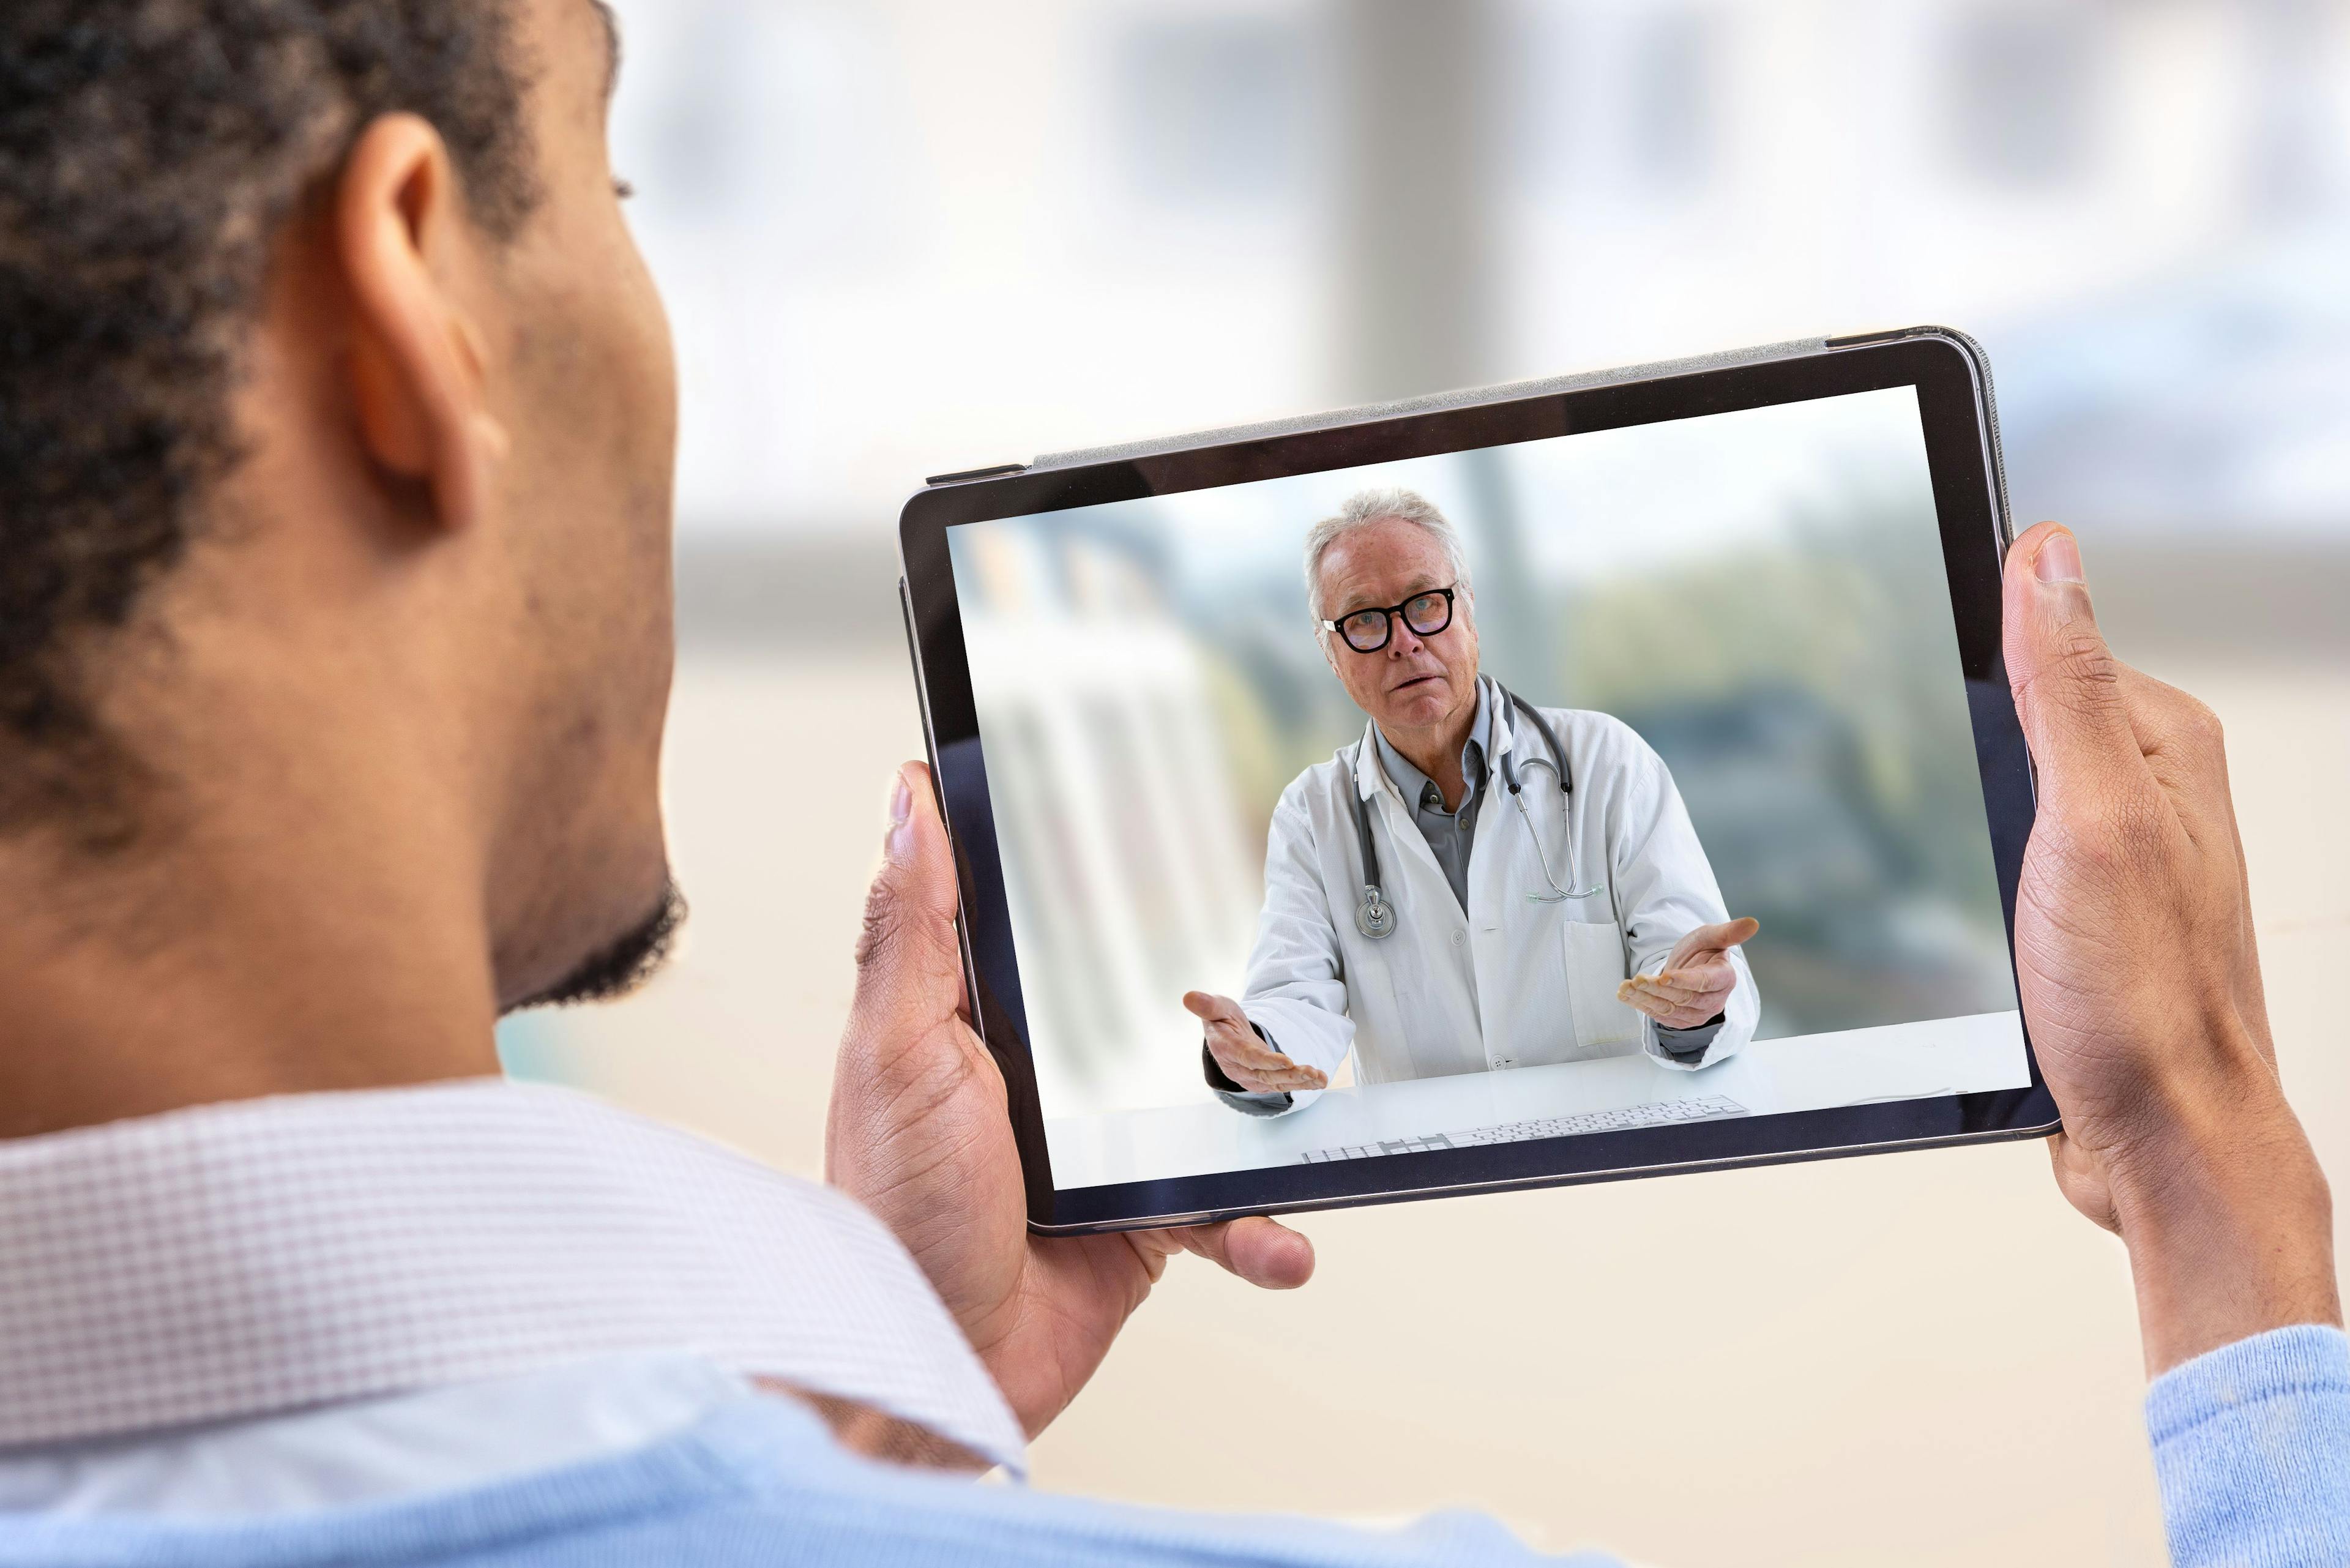 Telemedicine Deemed as Effective as Face-to-Face Care in Patients with Rheumatic Disease